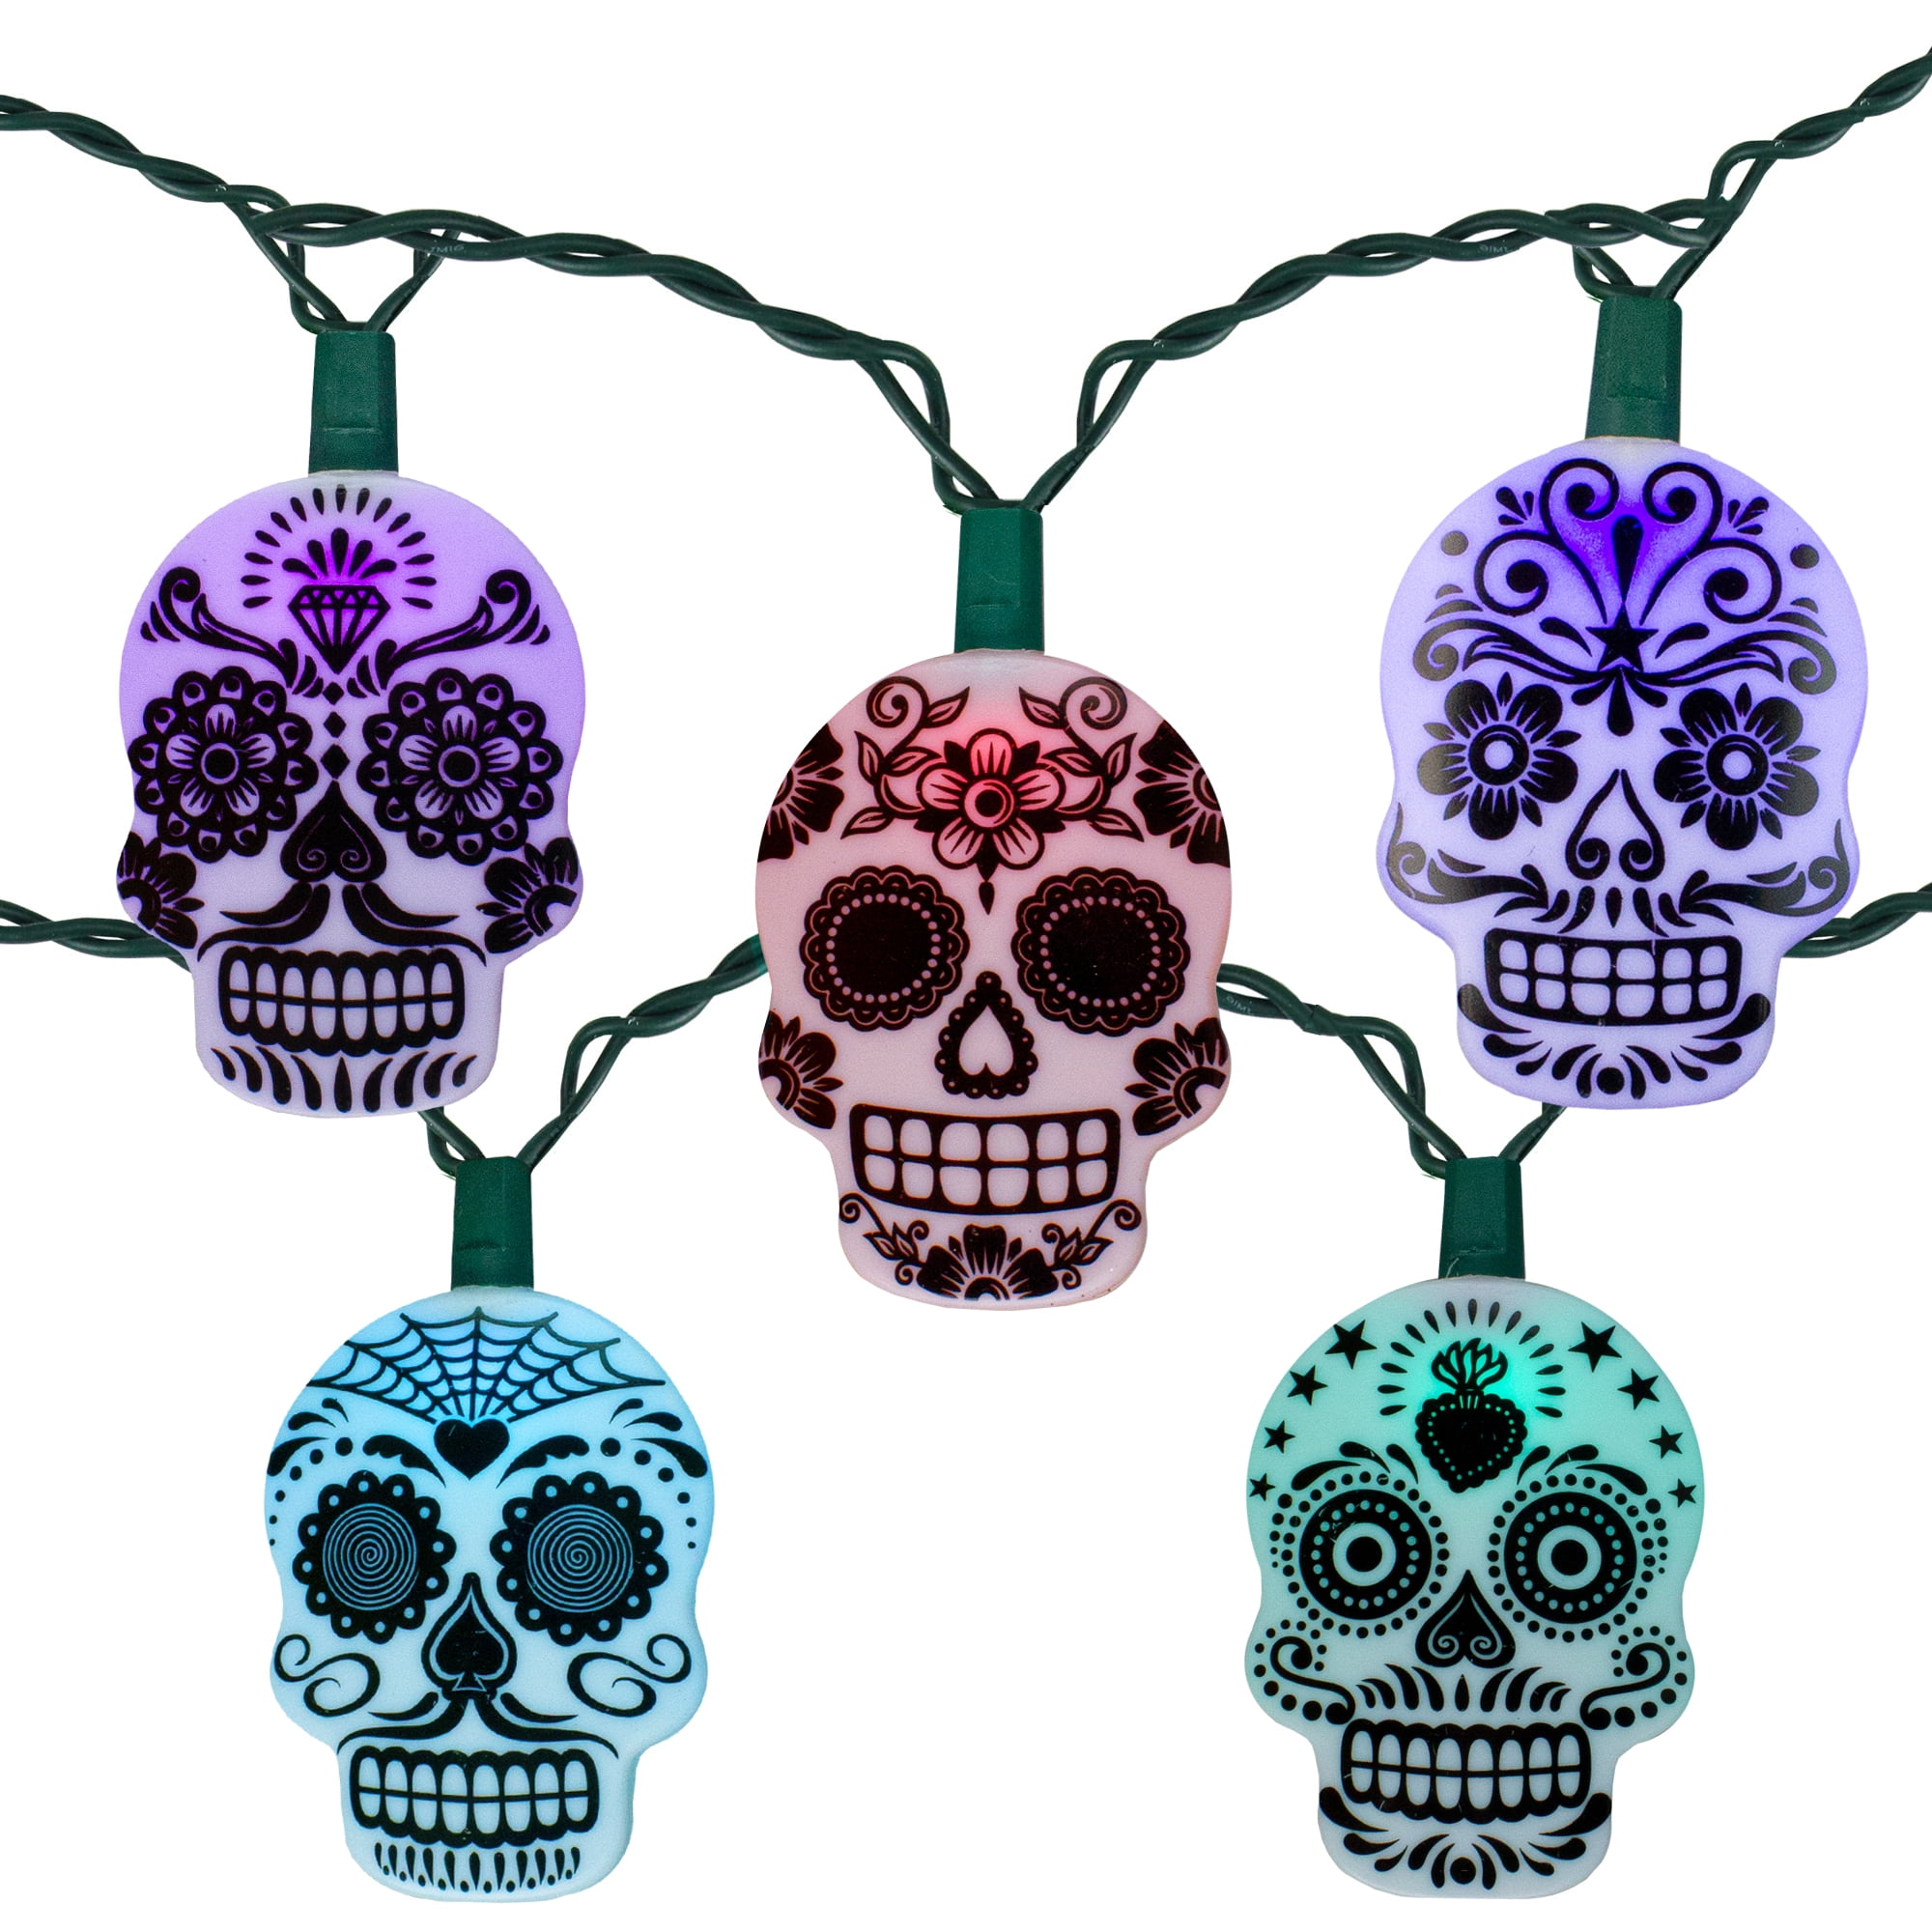 20 LED Colorful Skeleton Skull Lights for Window Porch Bar Indoor Outdoor House Yard Garden Halloween Party Decoration Halloween Decoration String Lights Brwoynn 10ft Halloween Skull String Light